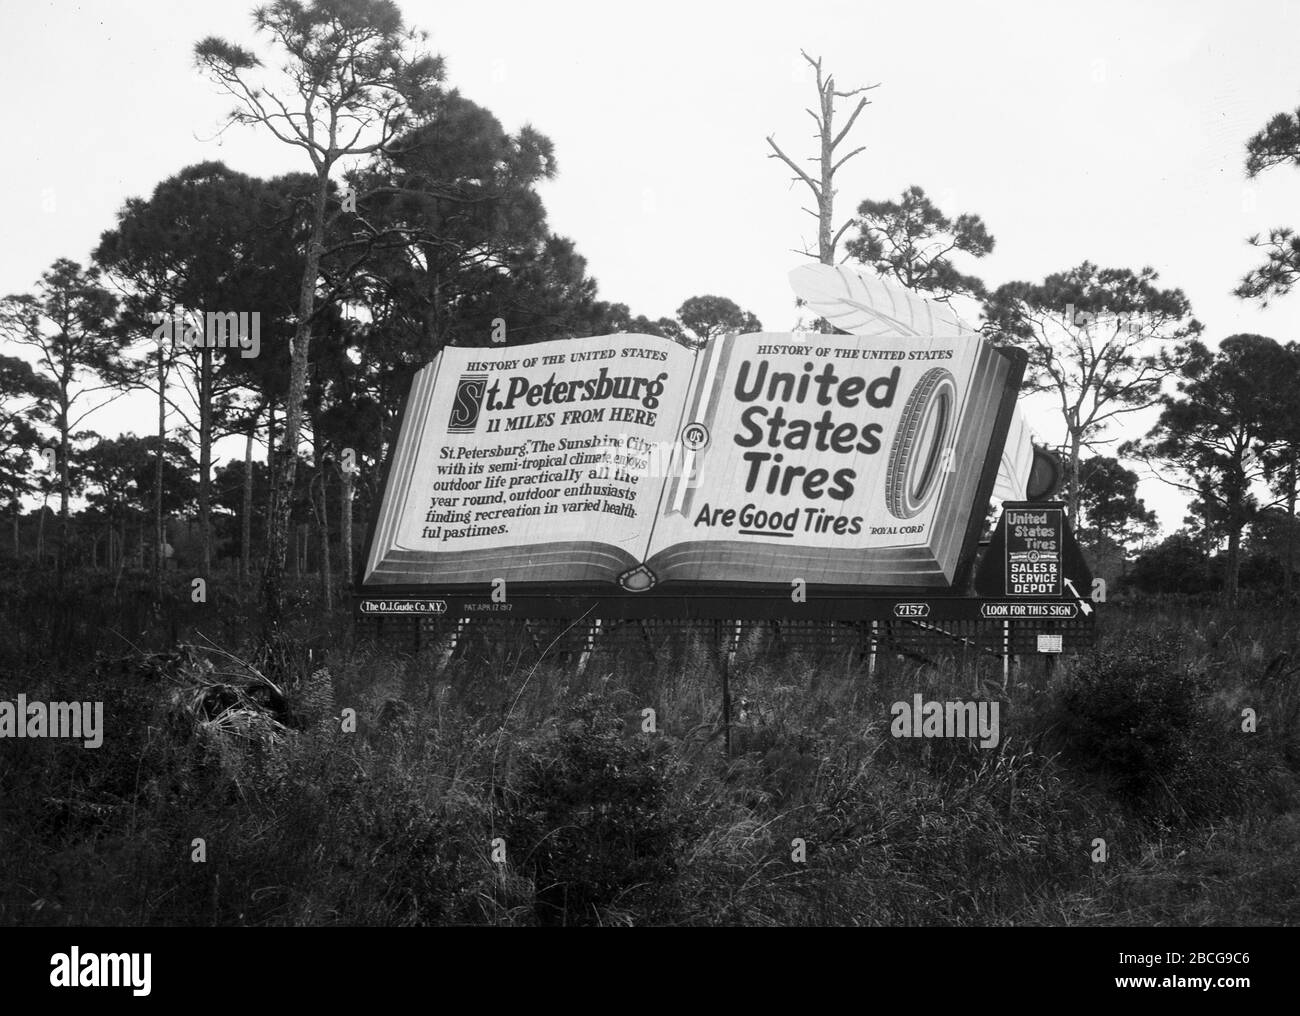 A billboard for United States Tires with a book about United States history open to pages about nearby St. Petersburg and U.S. Tires, Florida, 1920s. (Photo by Burton Holmes) Stock Photo